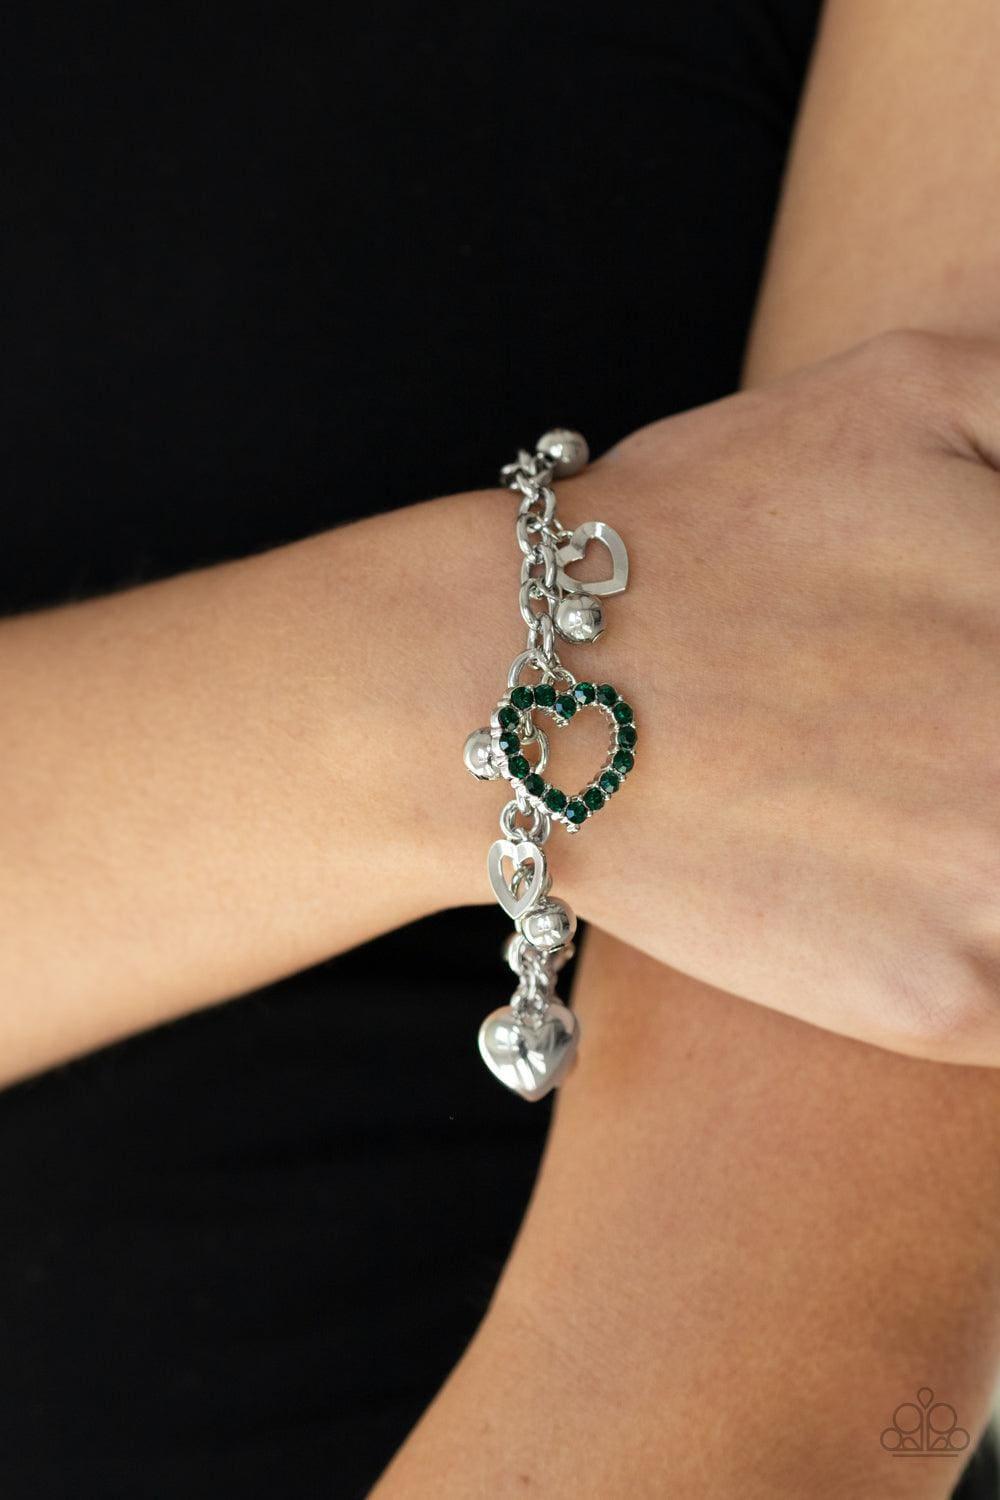 Paparazzi Accessories - Beautifully Big-hearted - Green Bracelet - Bling by JessieK